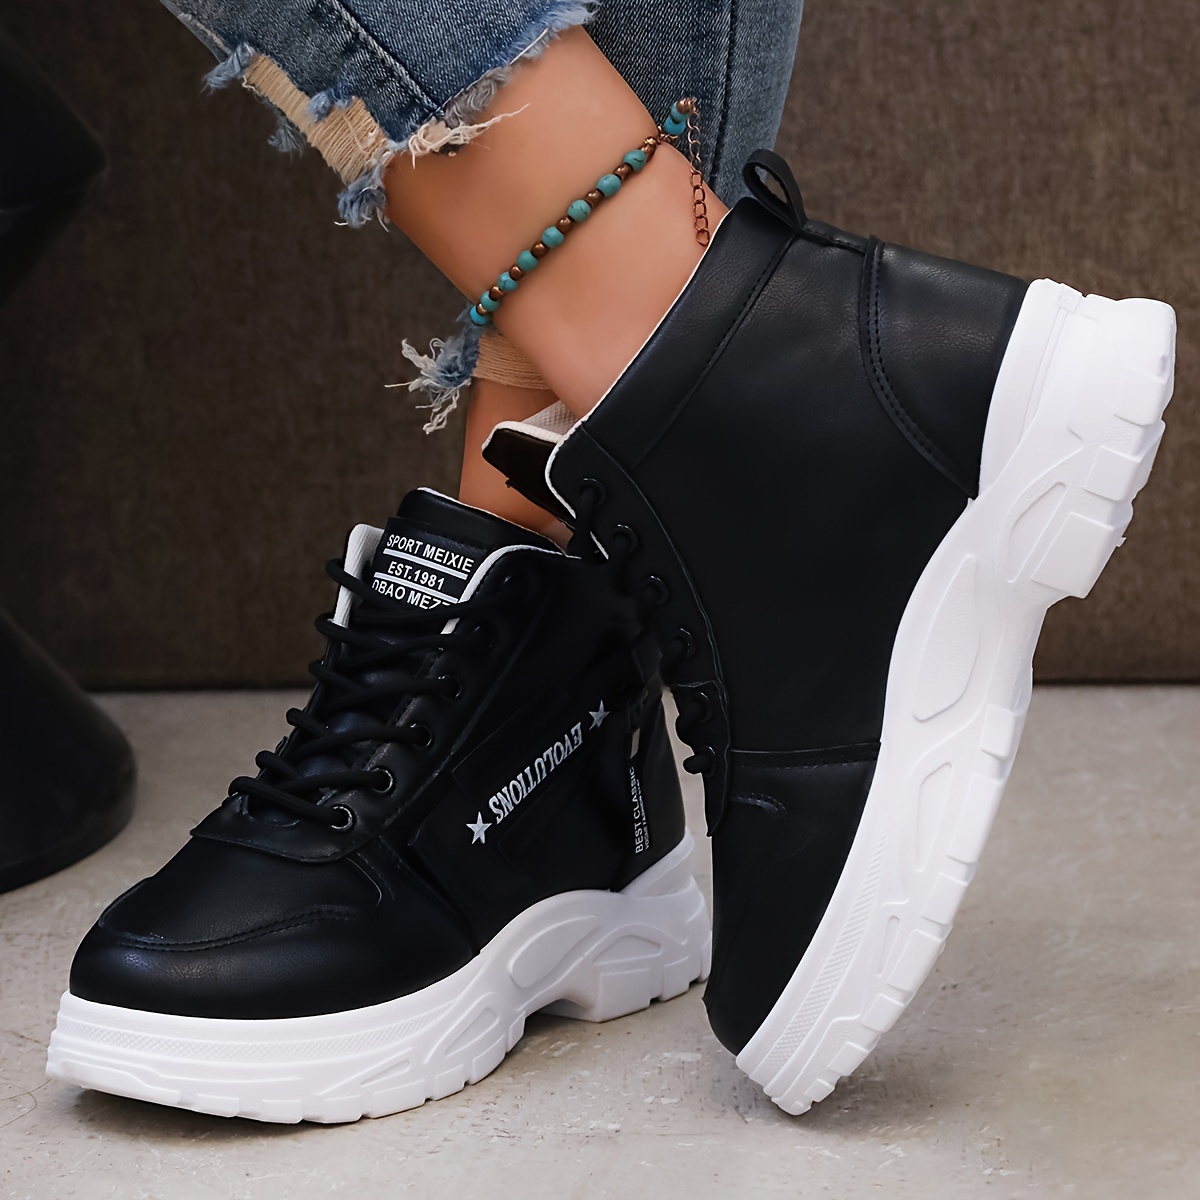 womens plush lined sneakers winter warm lace up high top ankle boots thermal outdoor shoes details 9